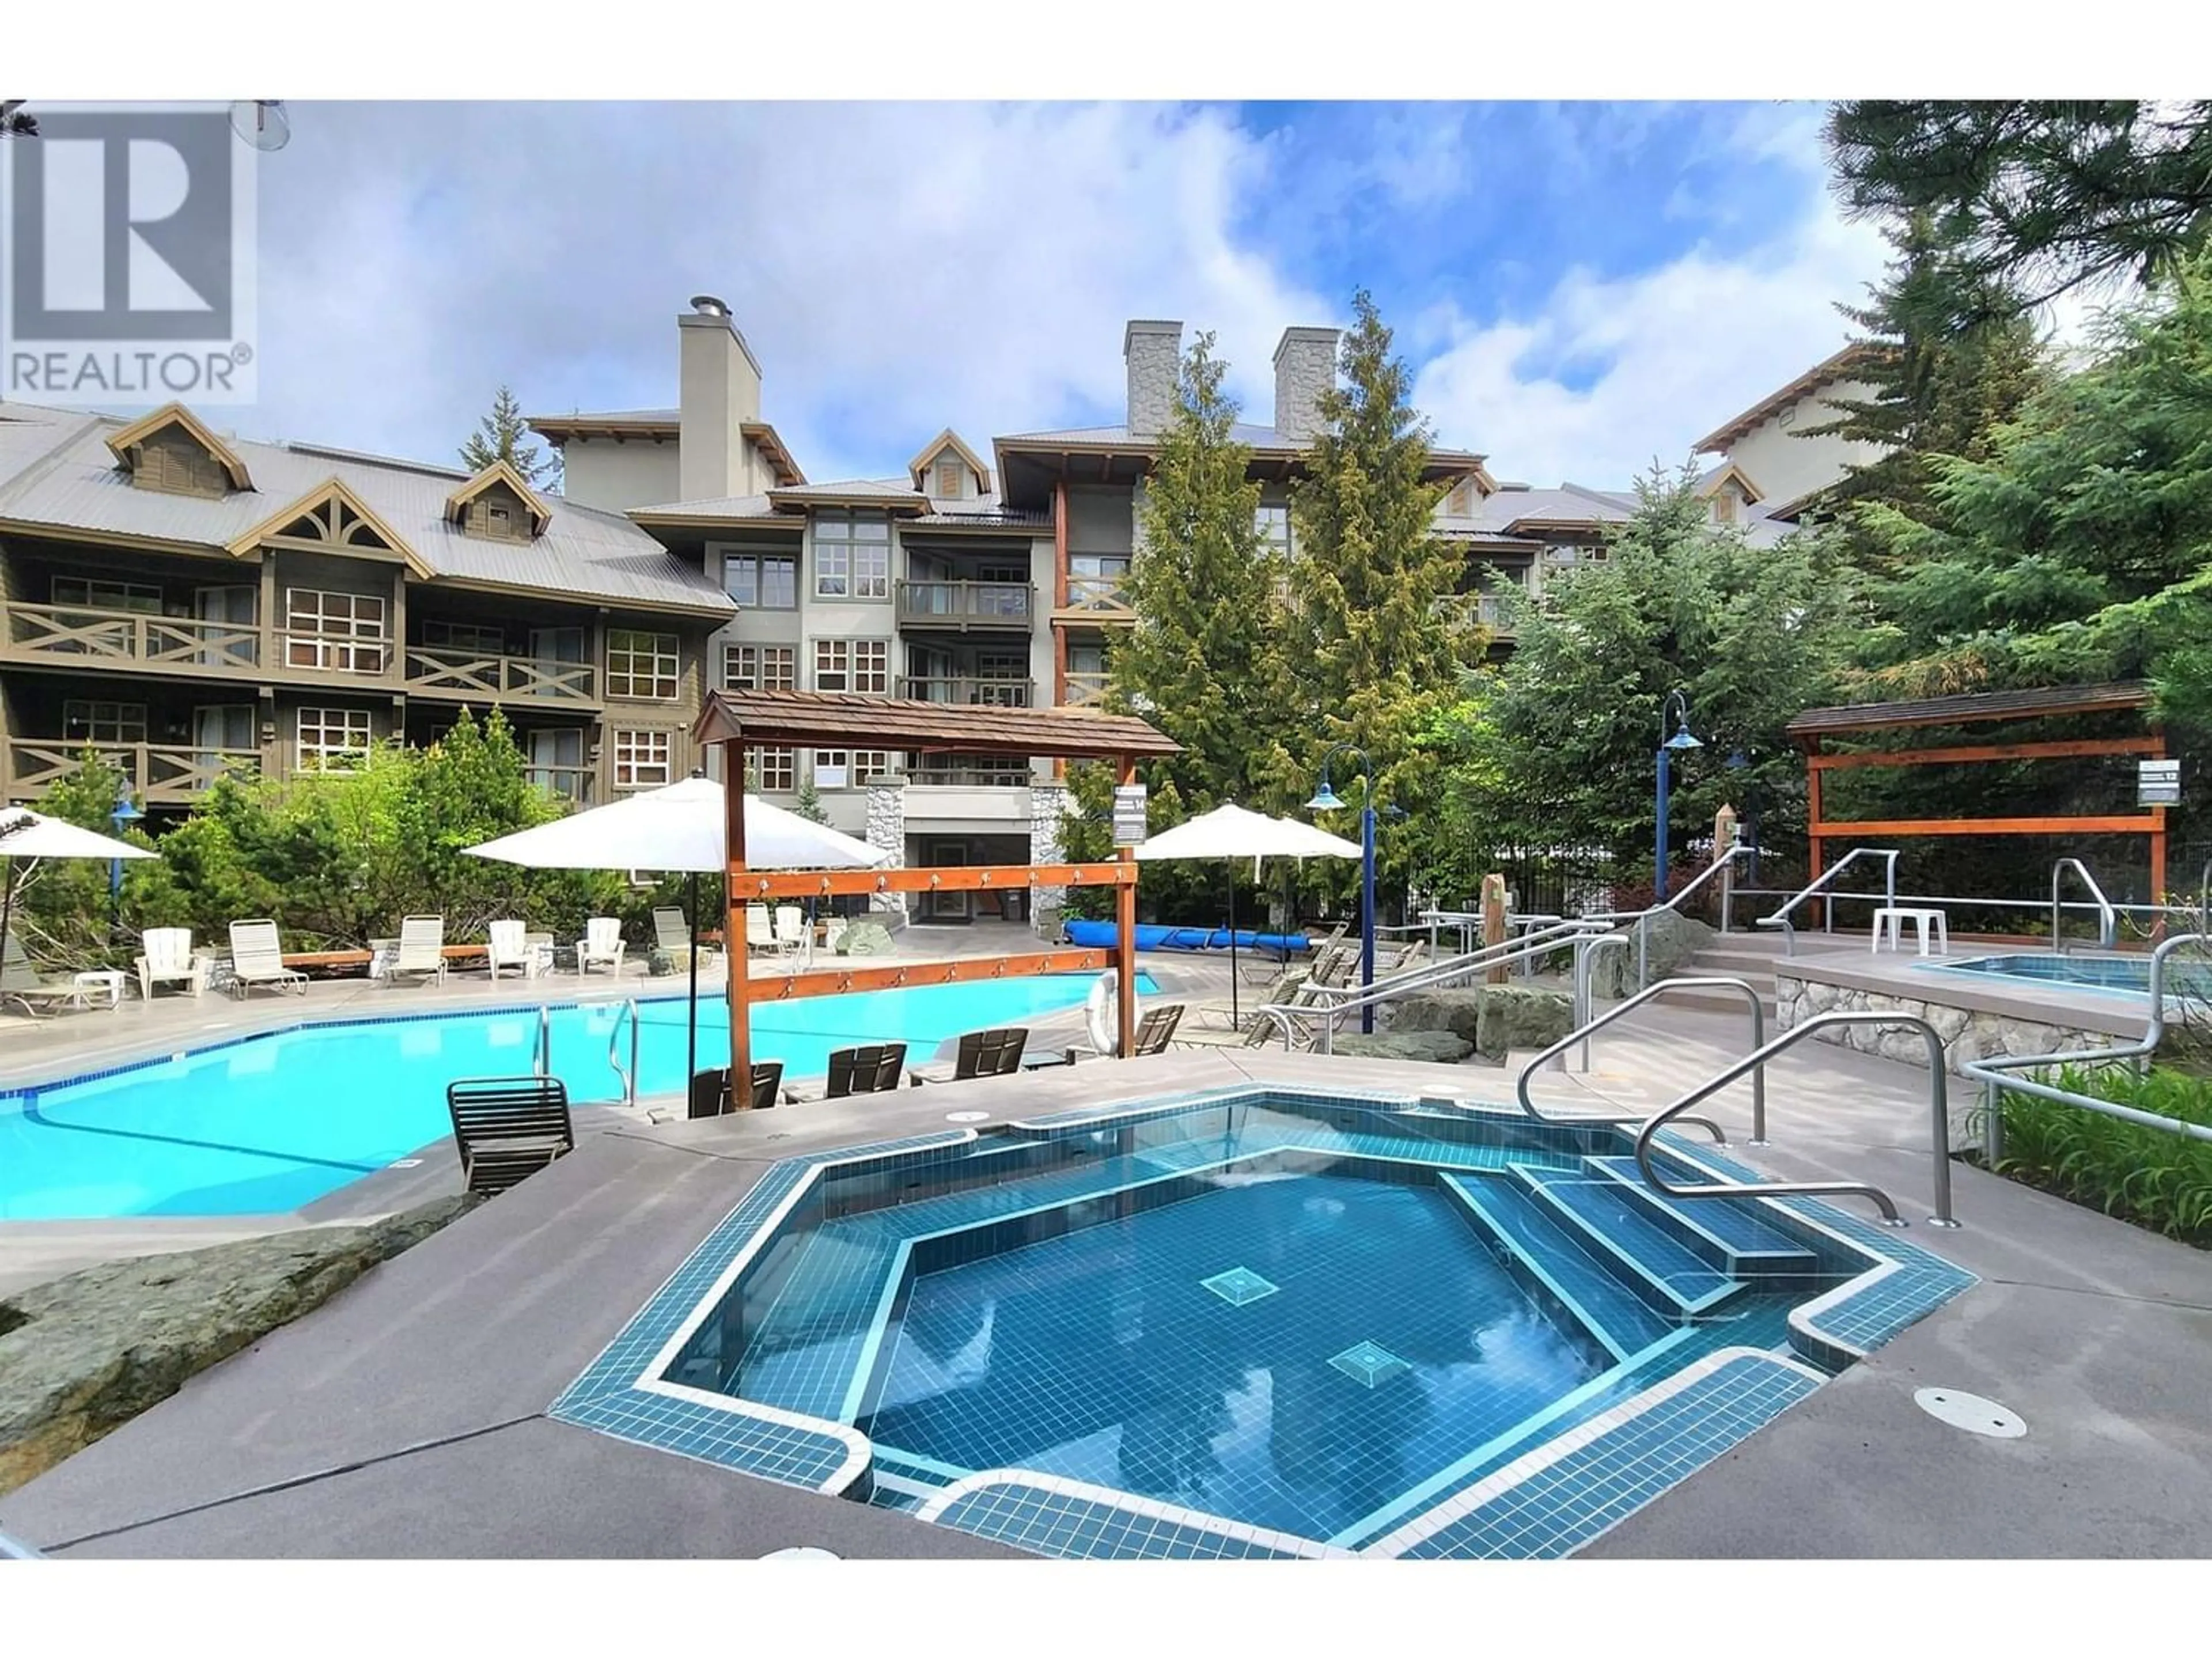 Indoor or outdoor pool for 620 4899 PAINTED CLIFF ROAD, Whistler British Columbia V8E1E2